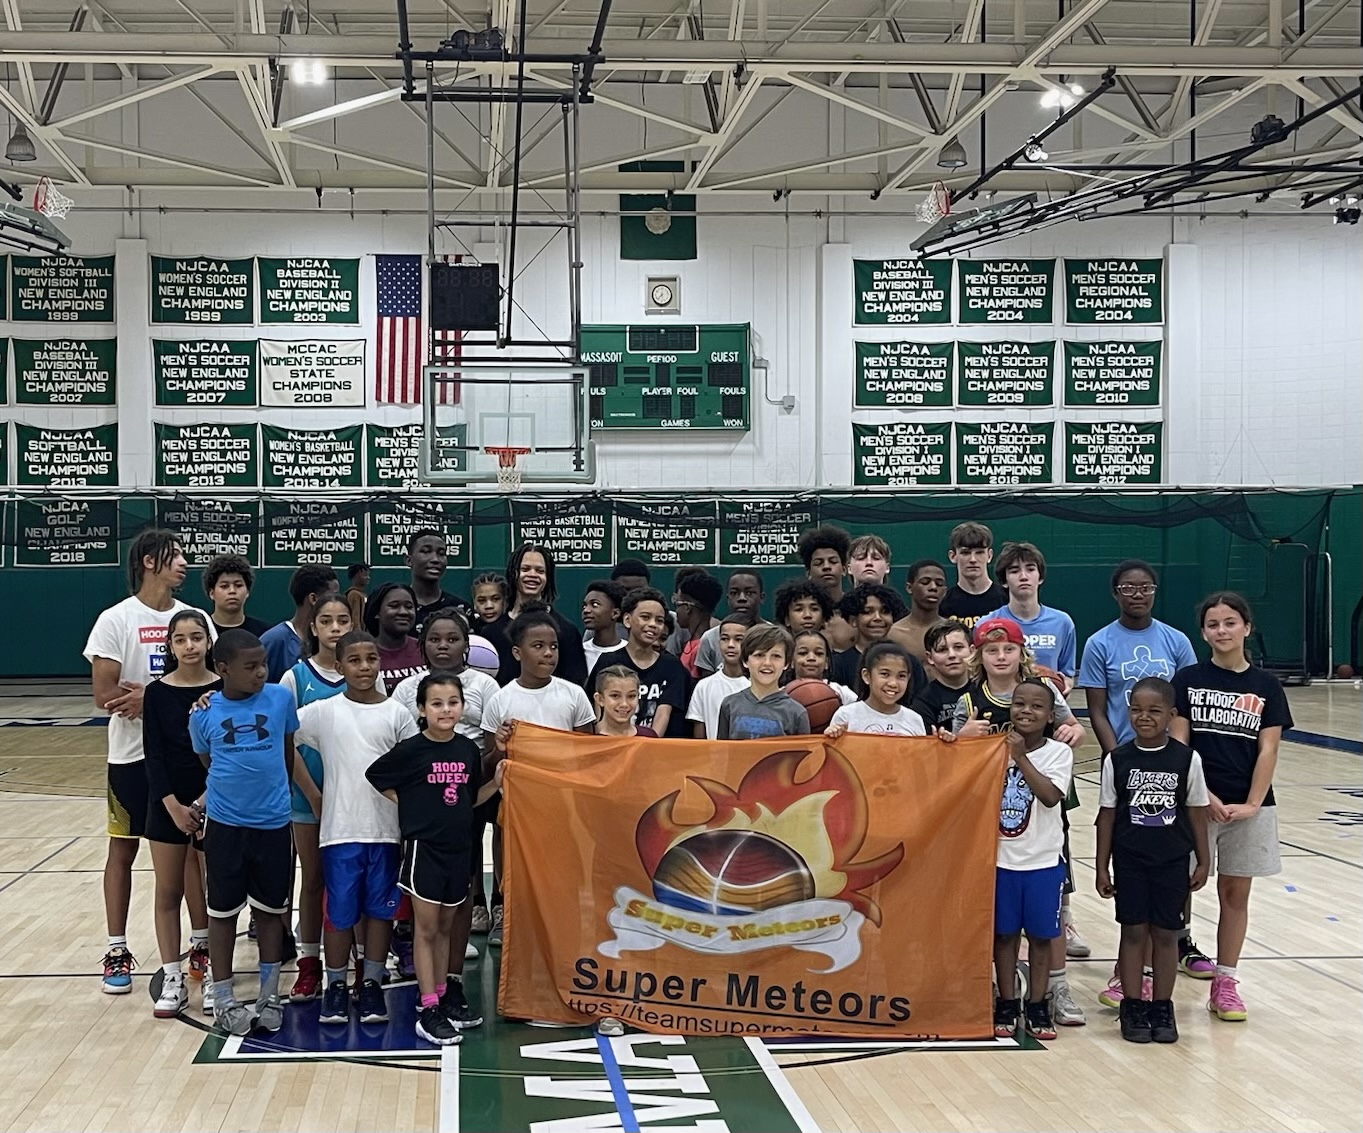 Super Meteors Hosts Successful Basketball Camp in Taunton, MA to Support Non-Profit Organization